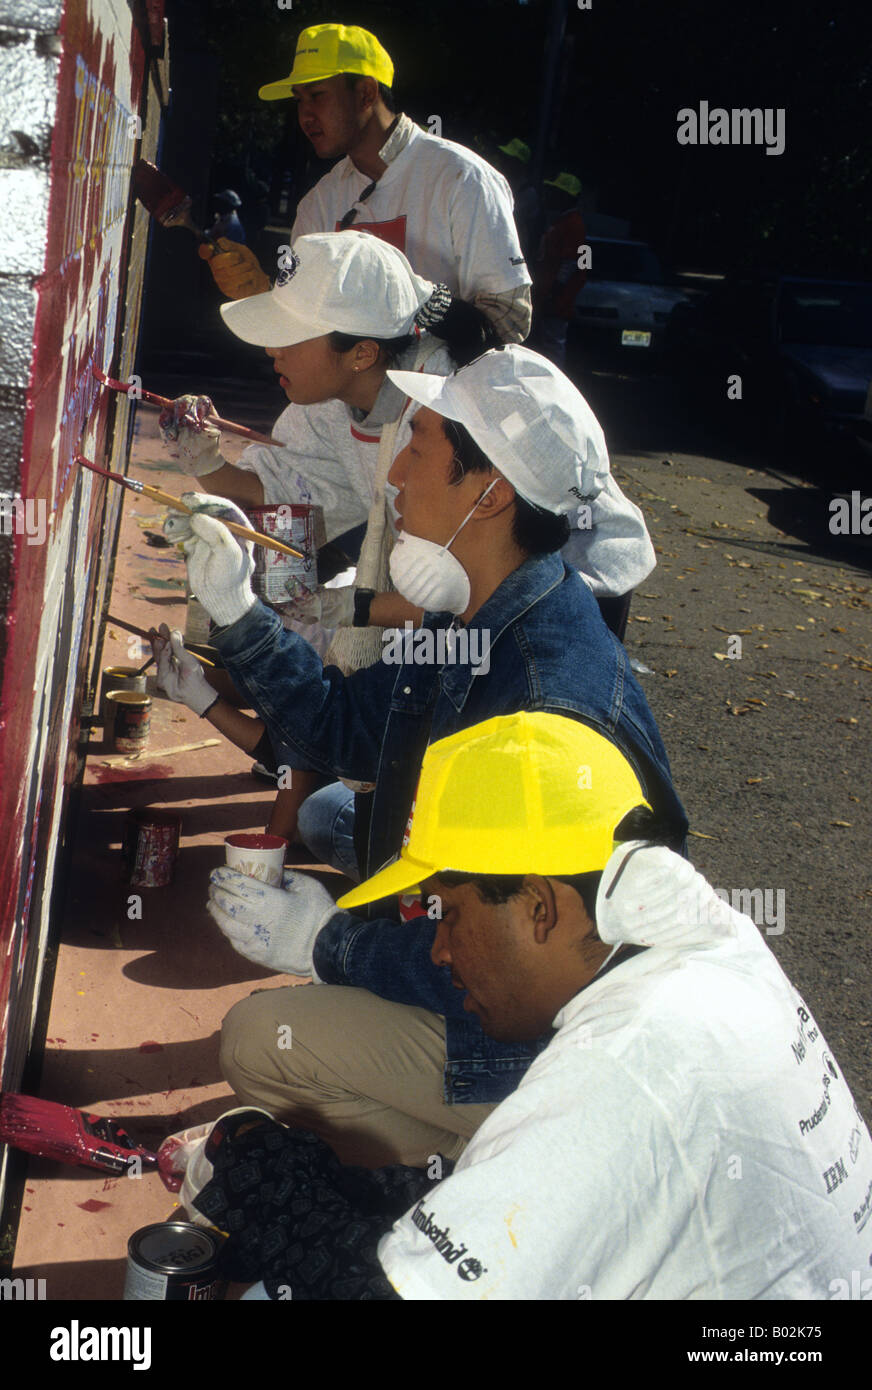 Volunteers from New York Cares paint a mural in a New York public school Stock Photo